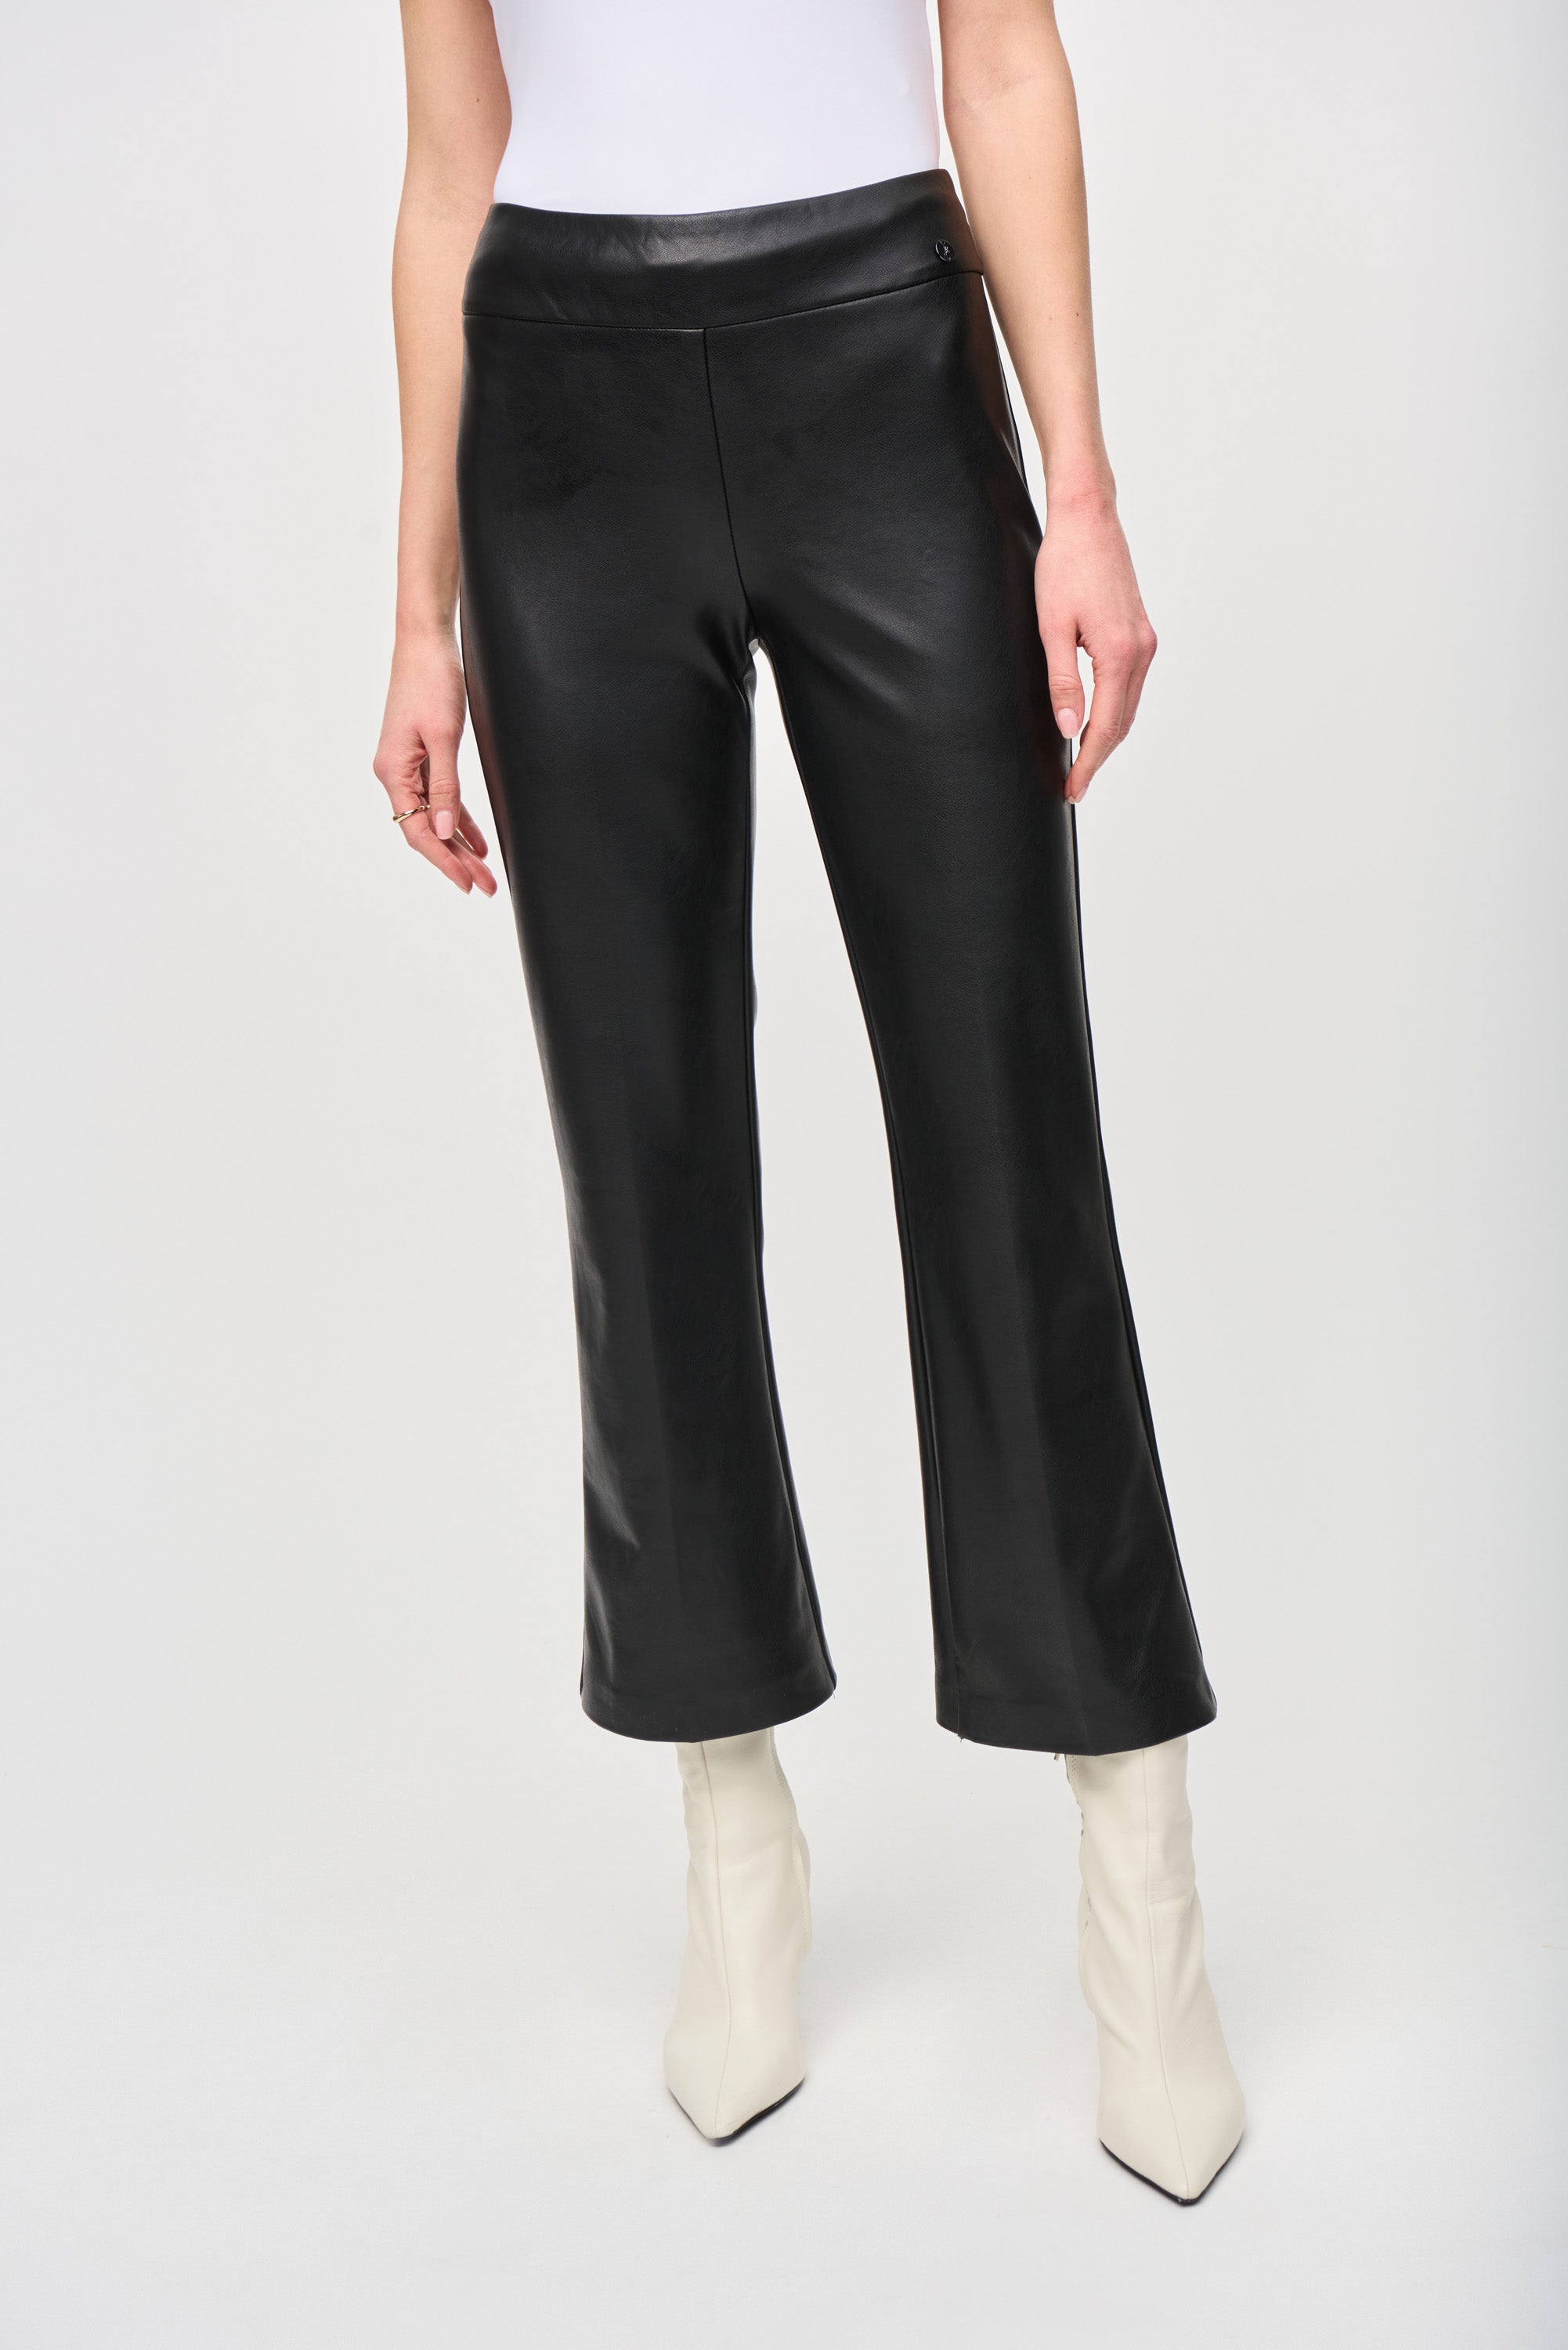 Joseph Ribkoff (243260) Women's Black Faux Leather Cropped & Flared Pull-On Pants